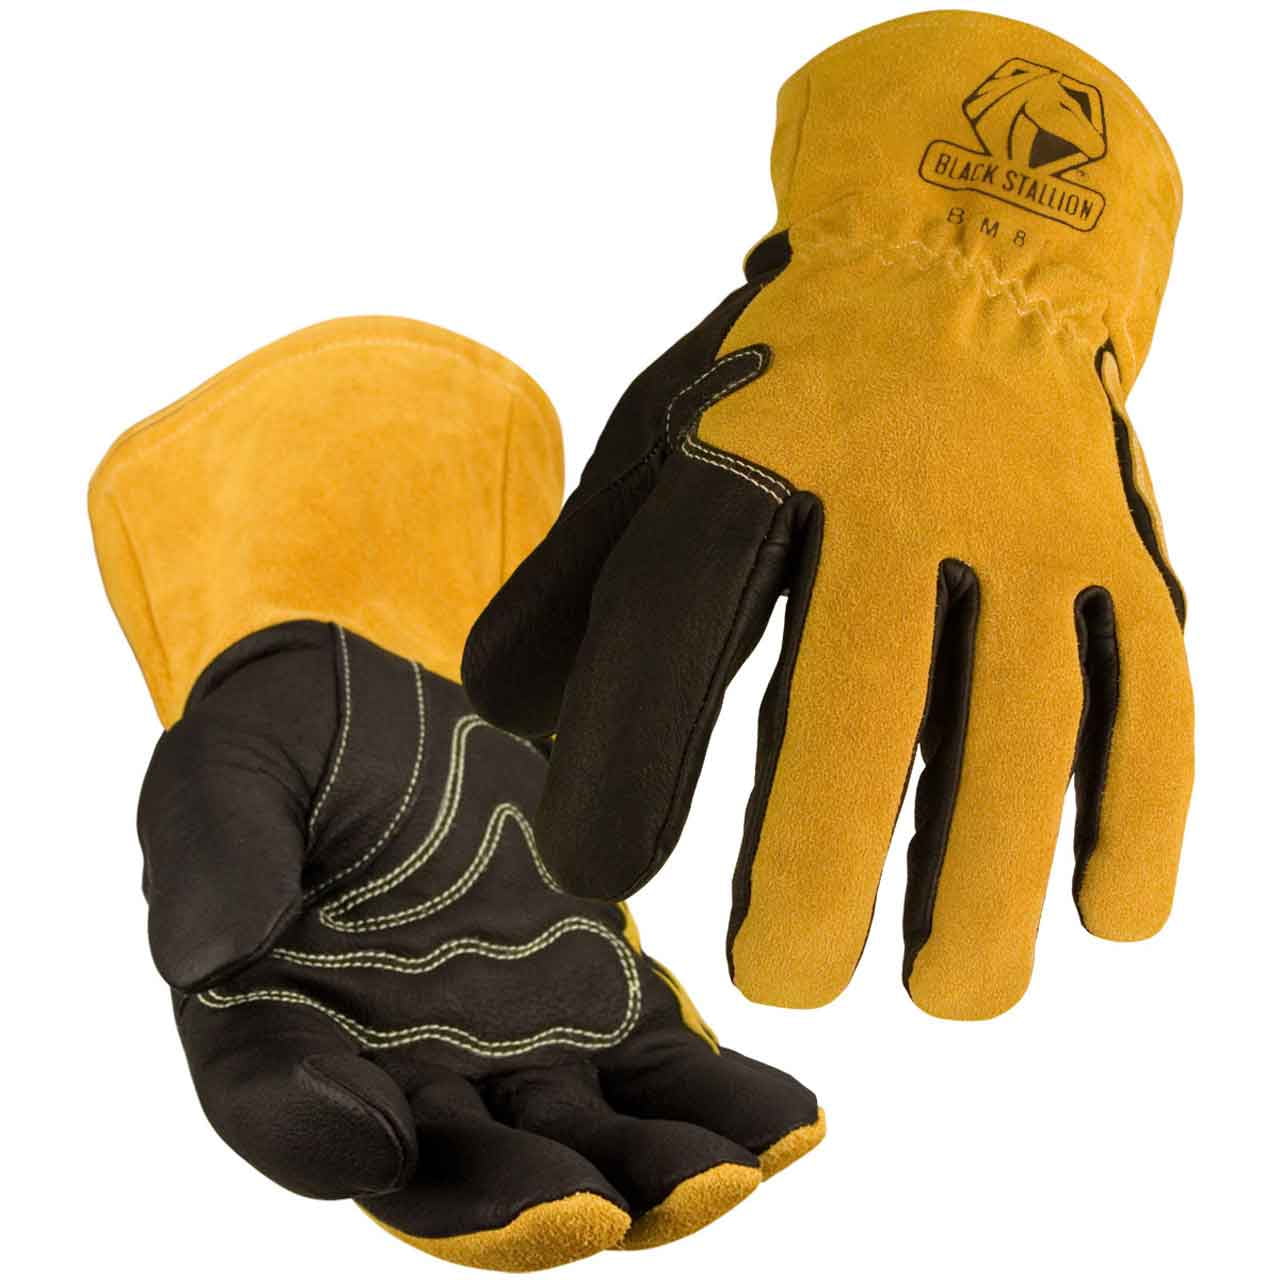 Revco Padded Long-Cuff Split Cowhide Stick 21" Welding or Grill Gloves 